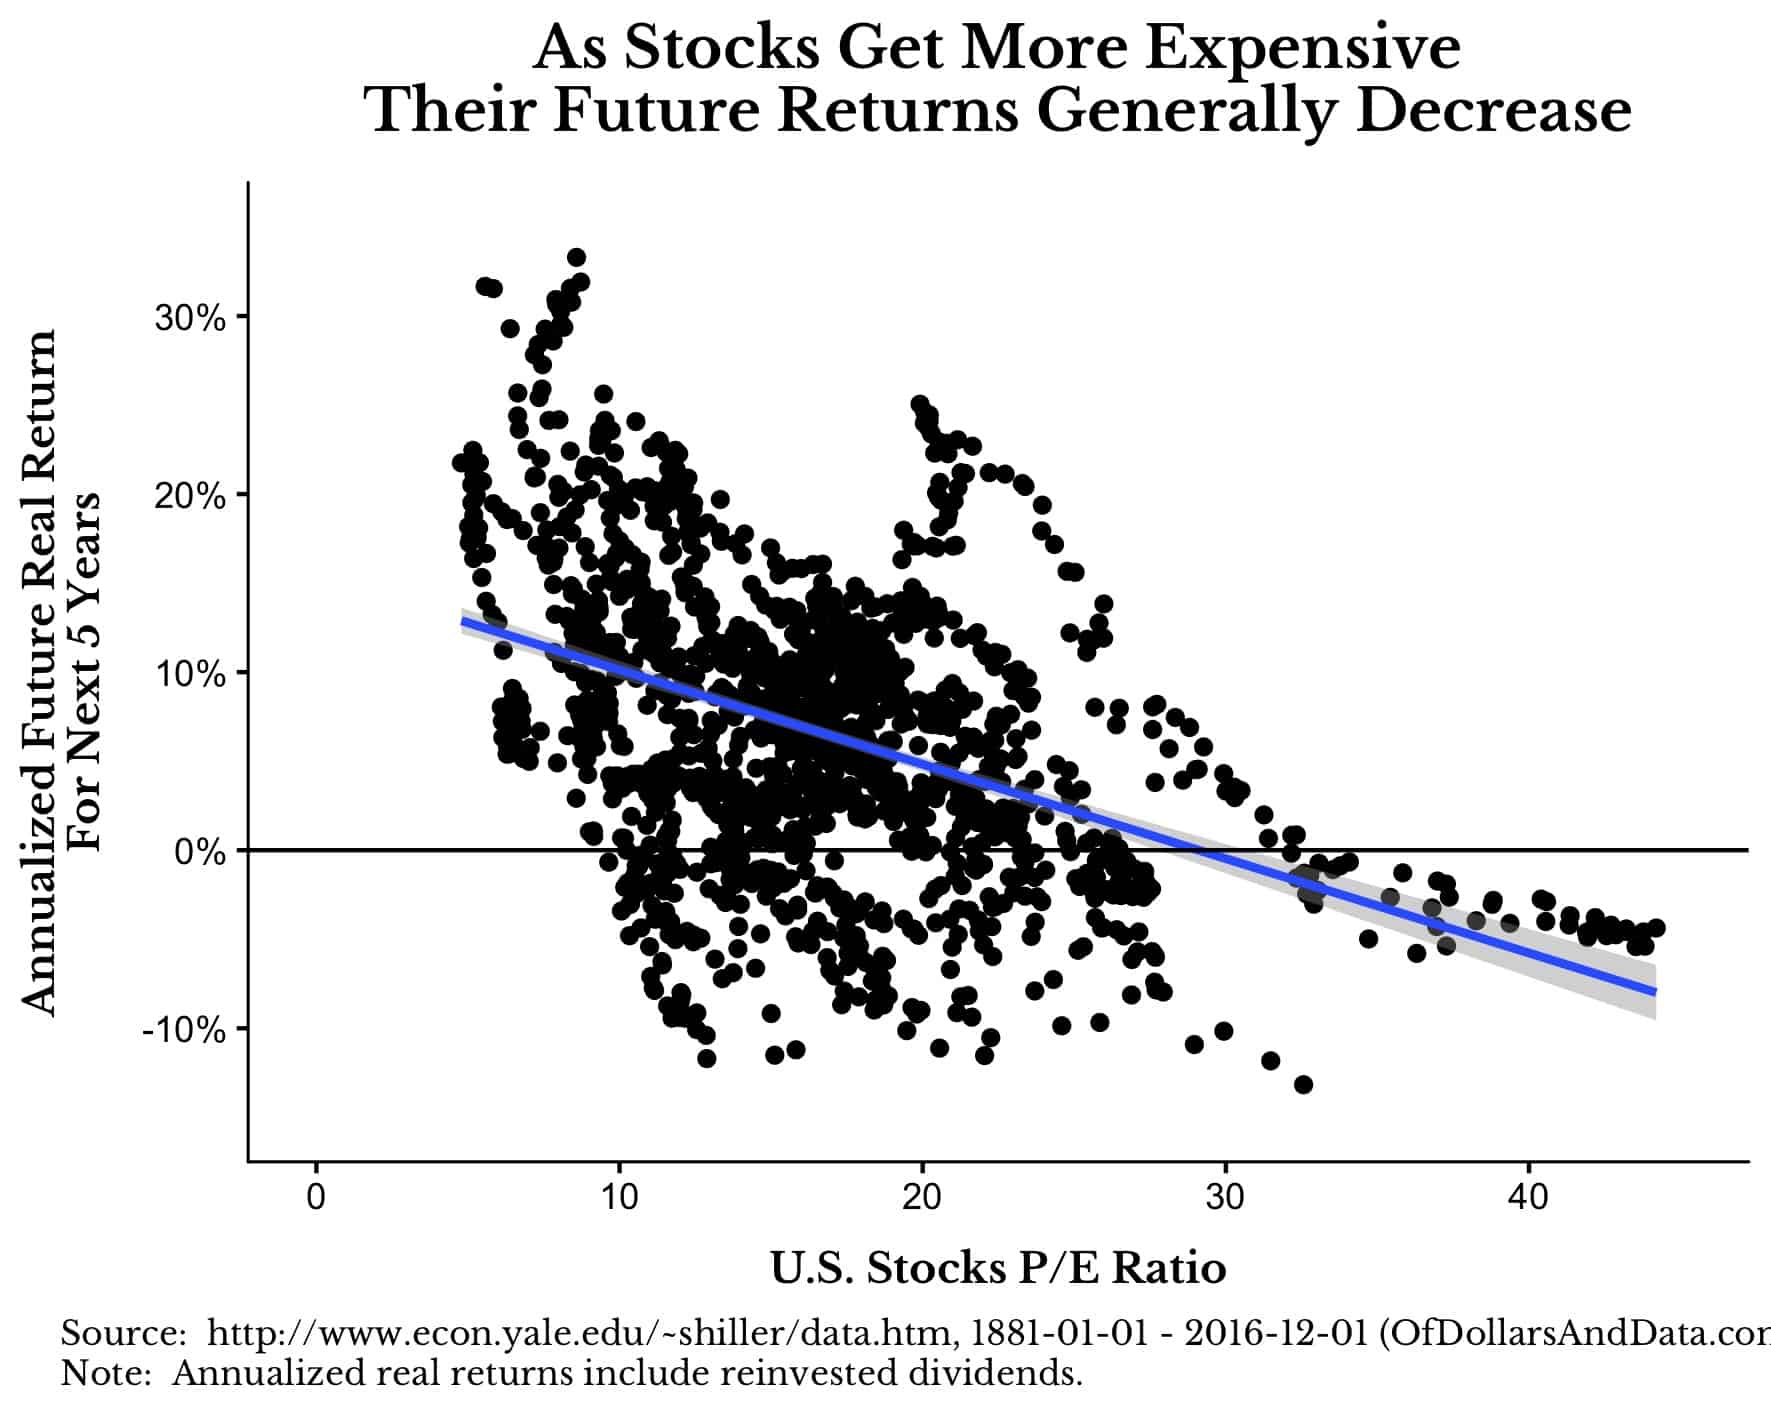 Annualize future real returns of US stocks over the next five years against US stock price-to-earnings ratio